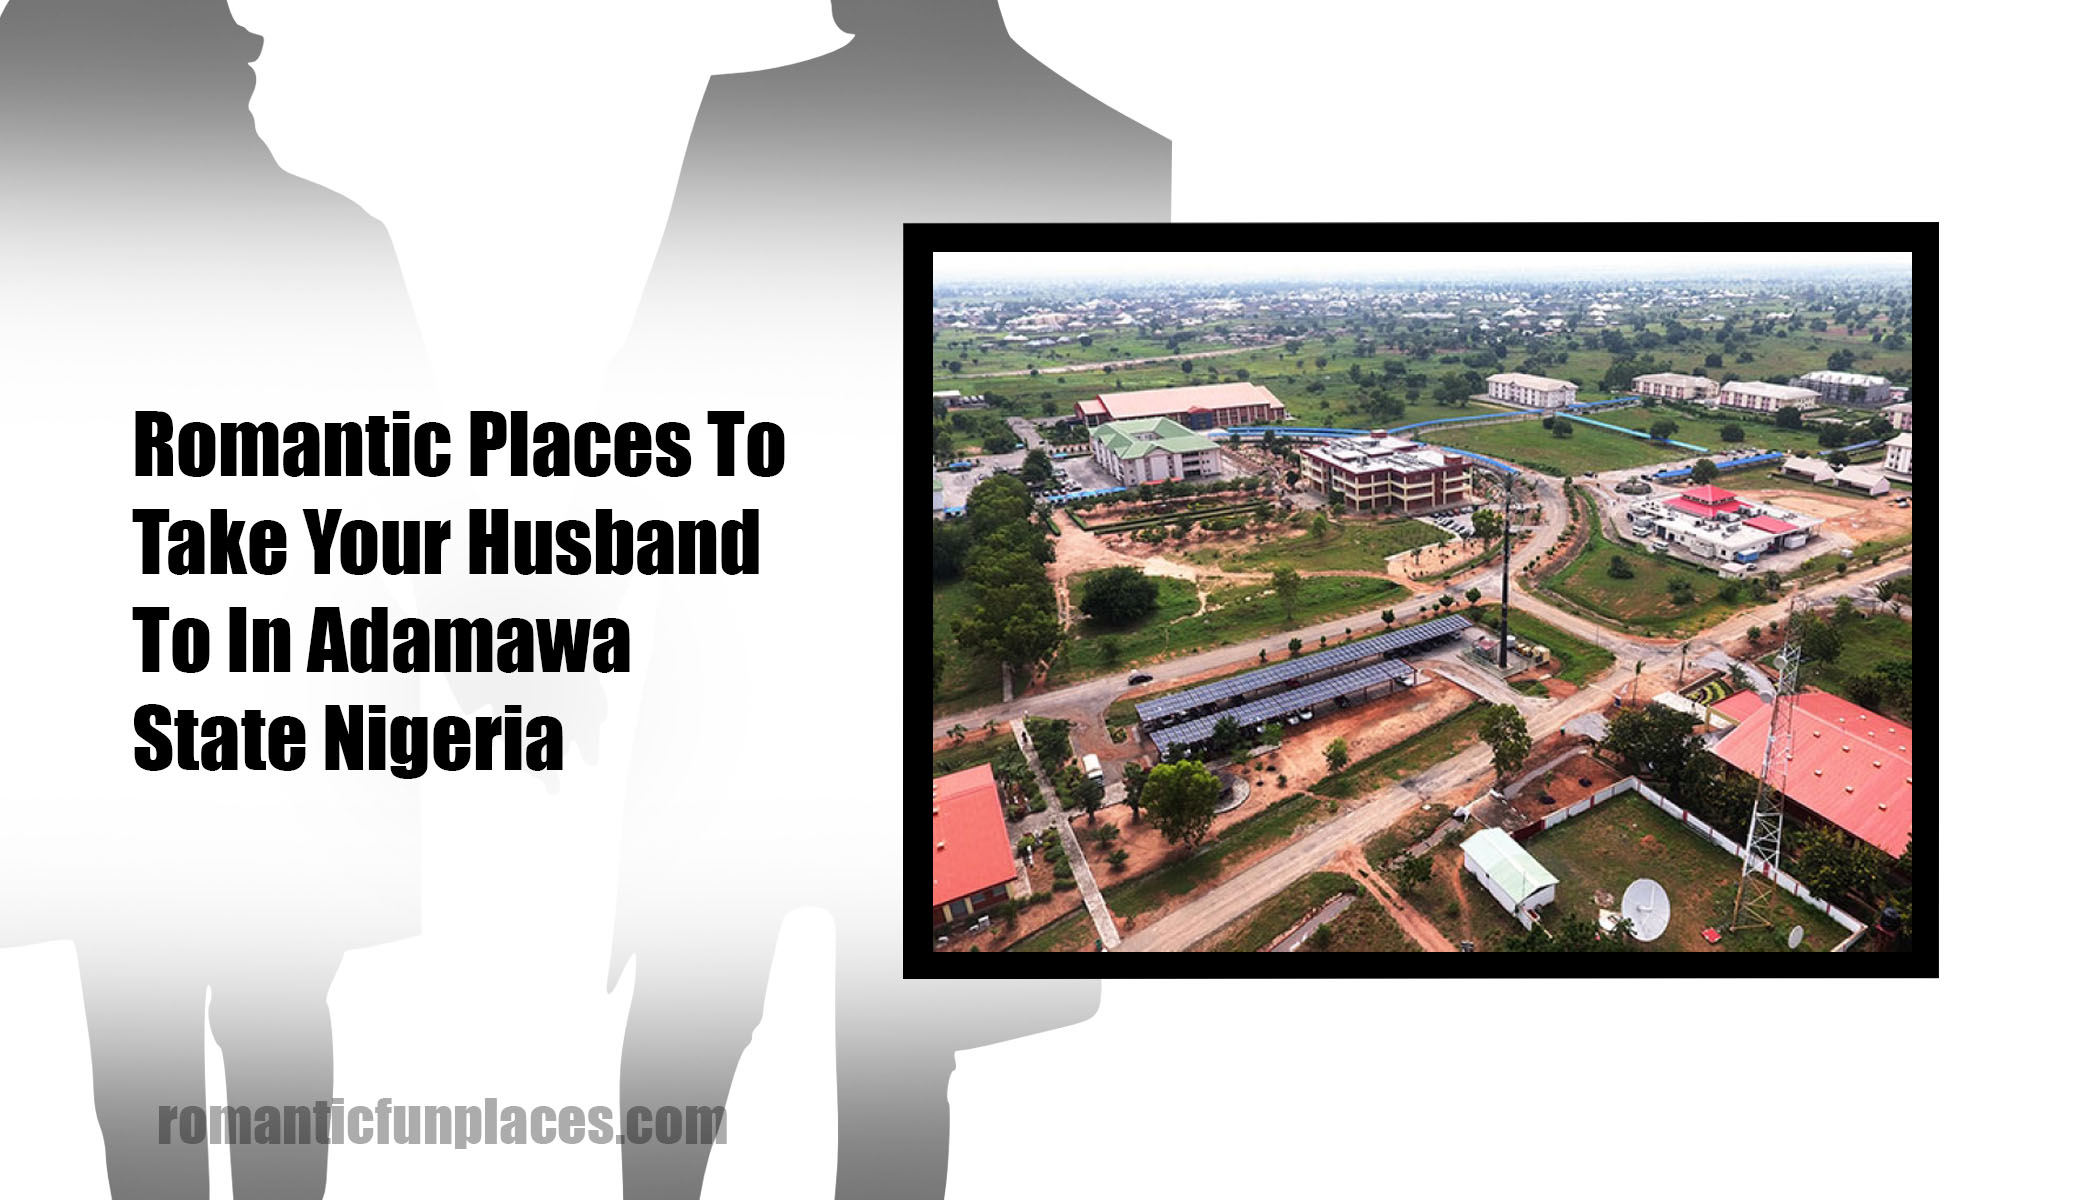 Romantic Places To Take Your Husband To In Adamawa State Nigeria